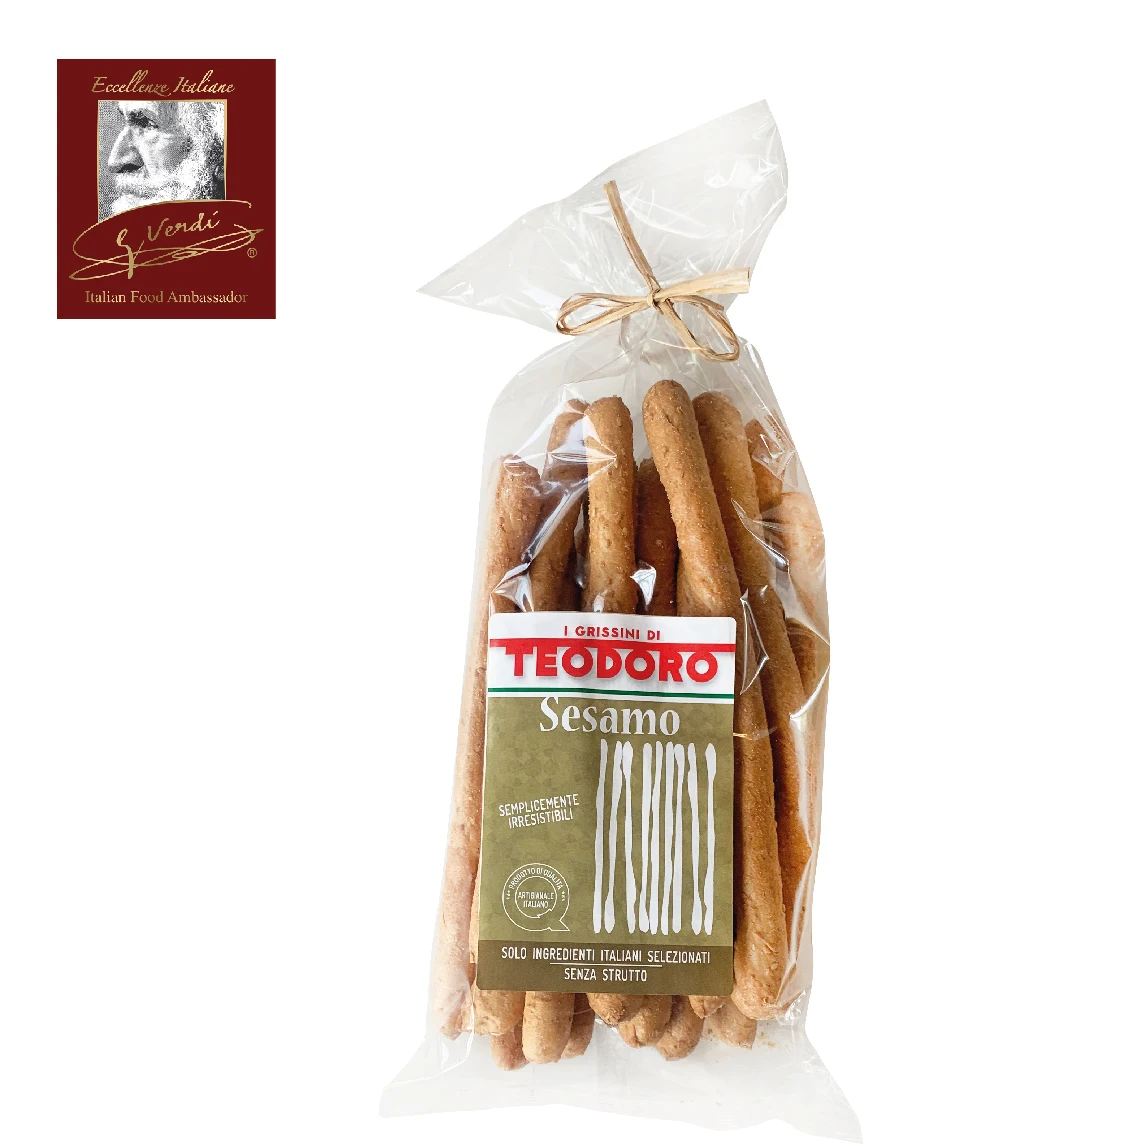 200 g Cheap Price Breadsticks with Sesame Grissini Giuseppe Verdi Selection Made in Italy Cheap Price (62584589009)